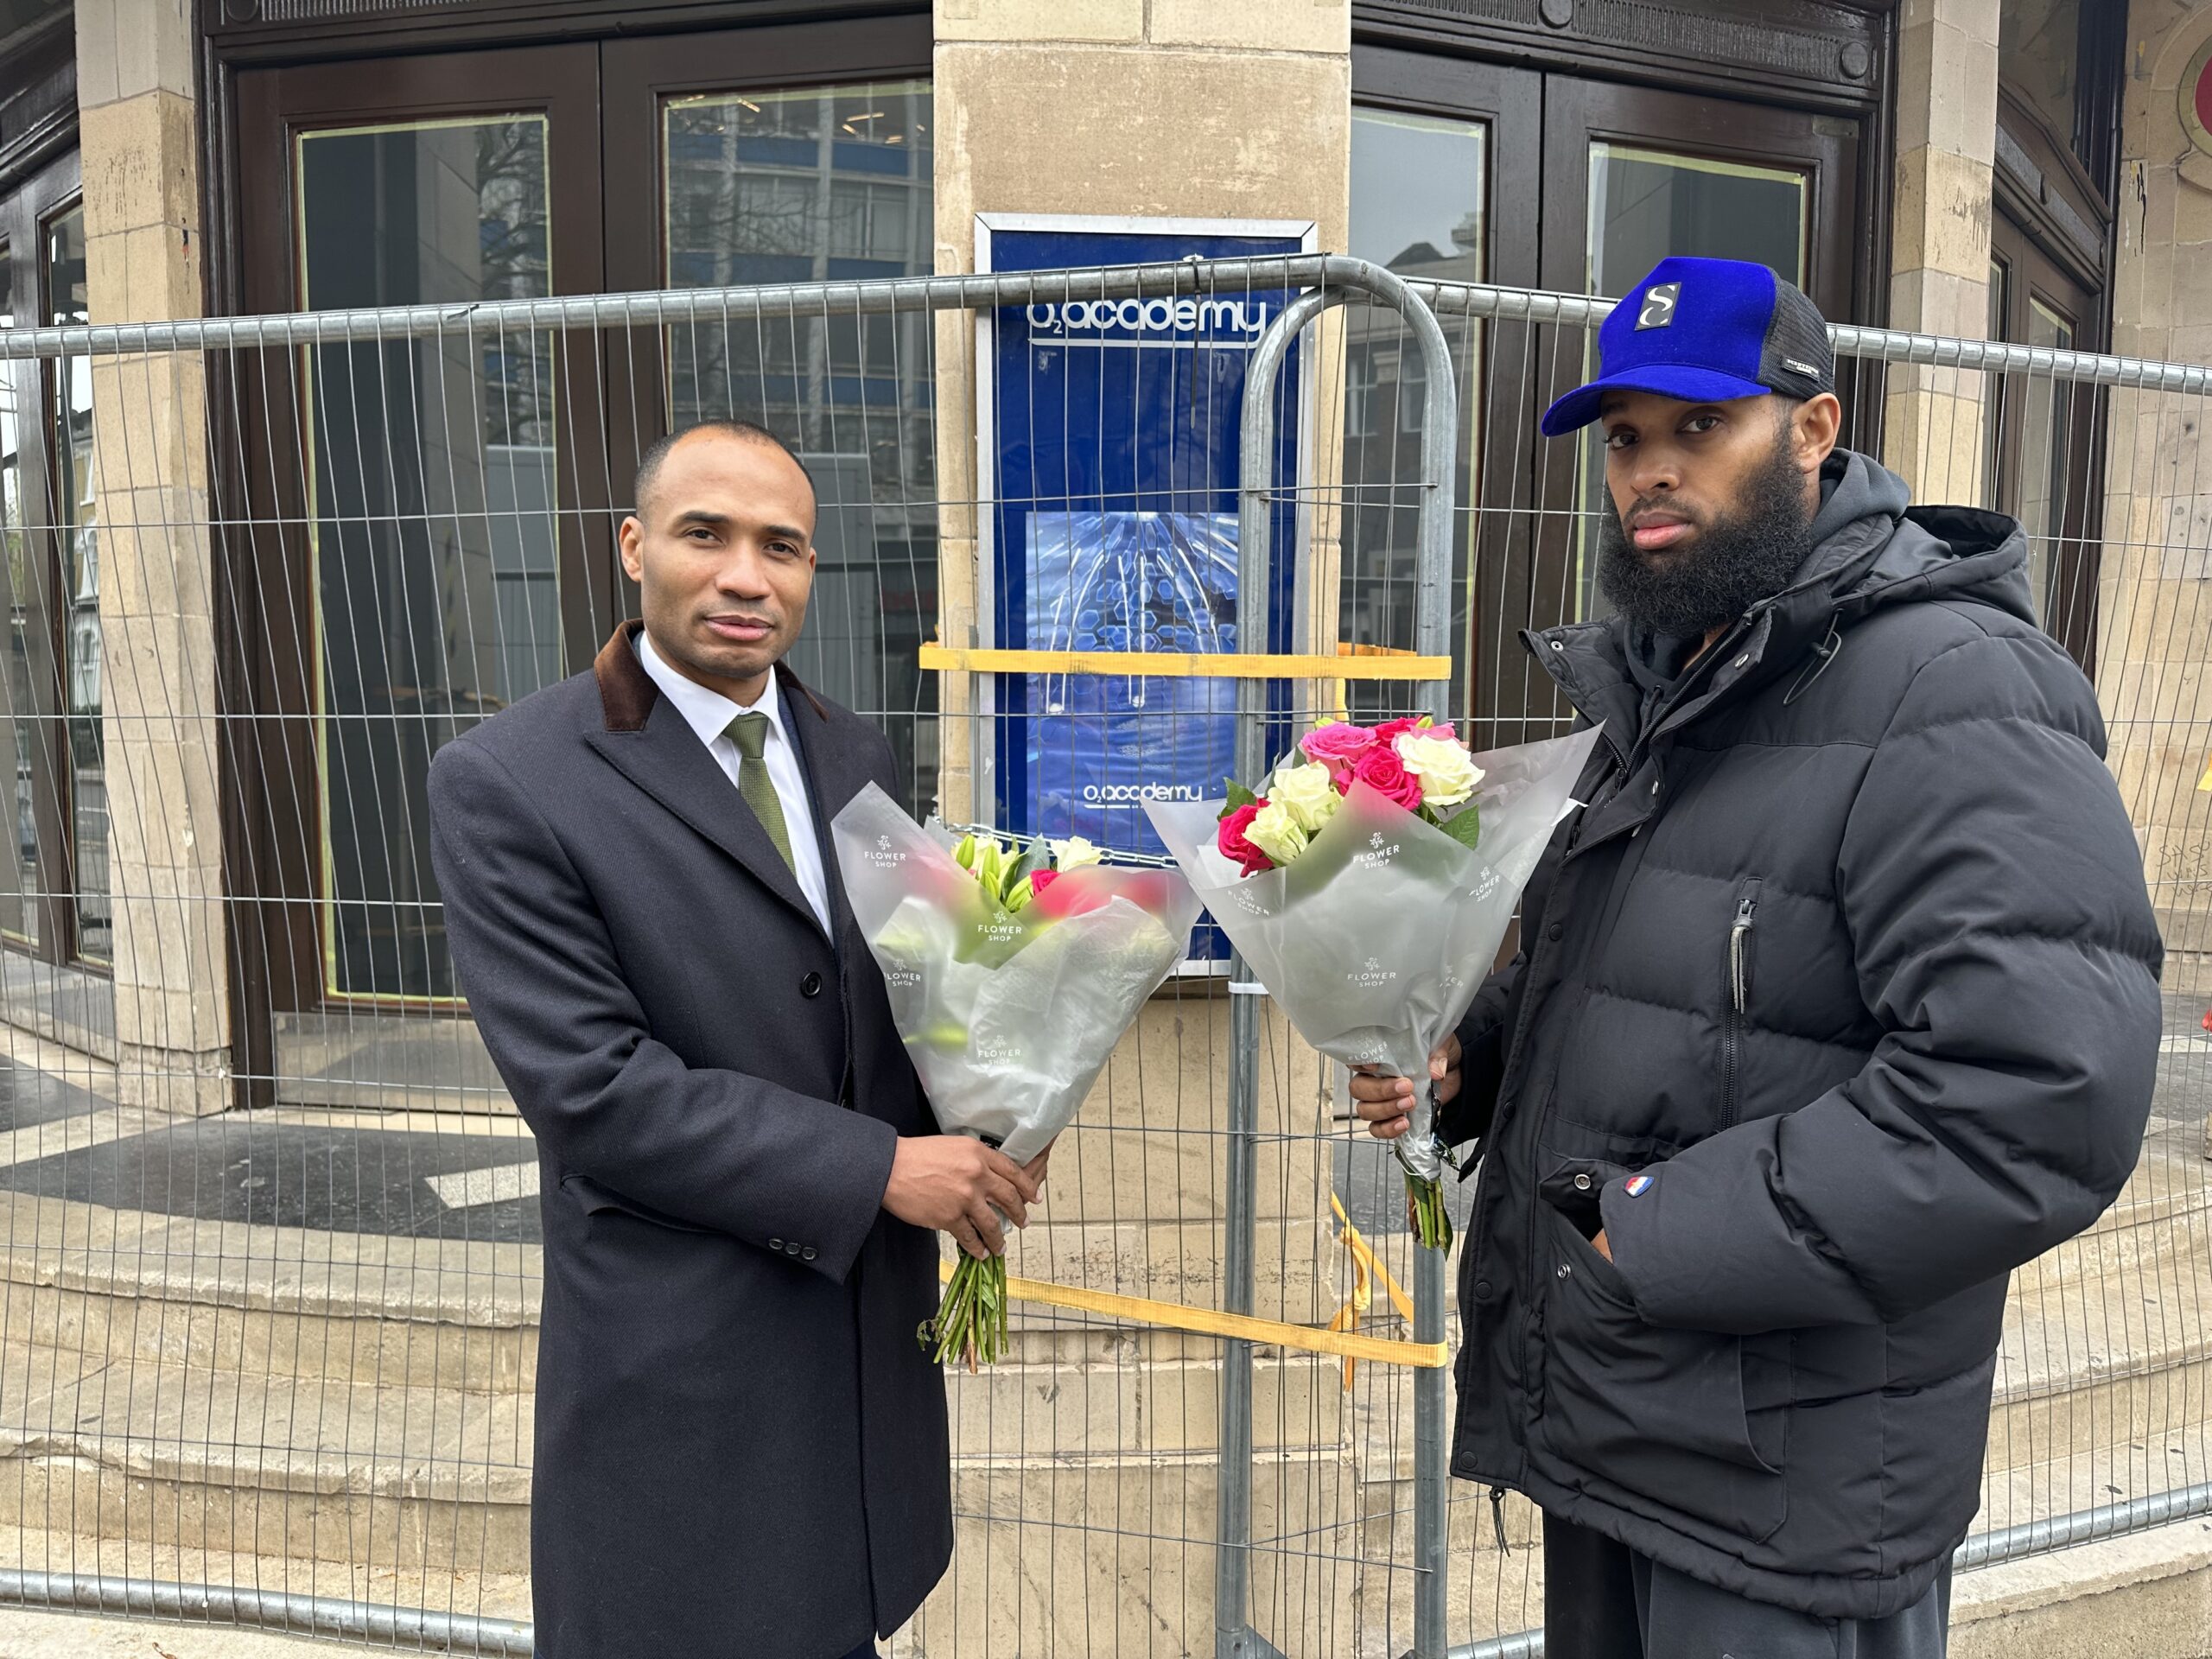 Brixton: Remembering the lives lost at the O2 Brixton Academy